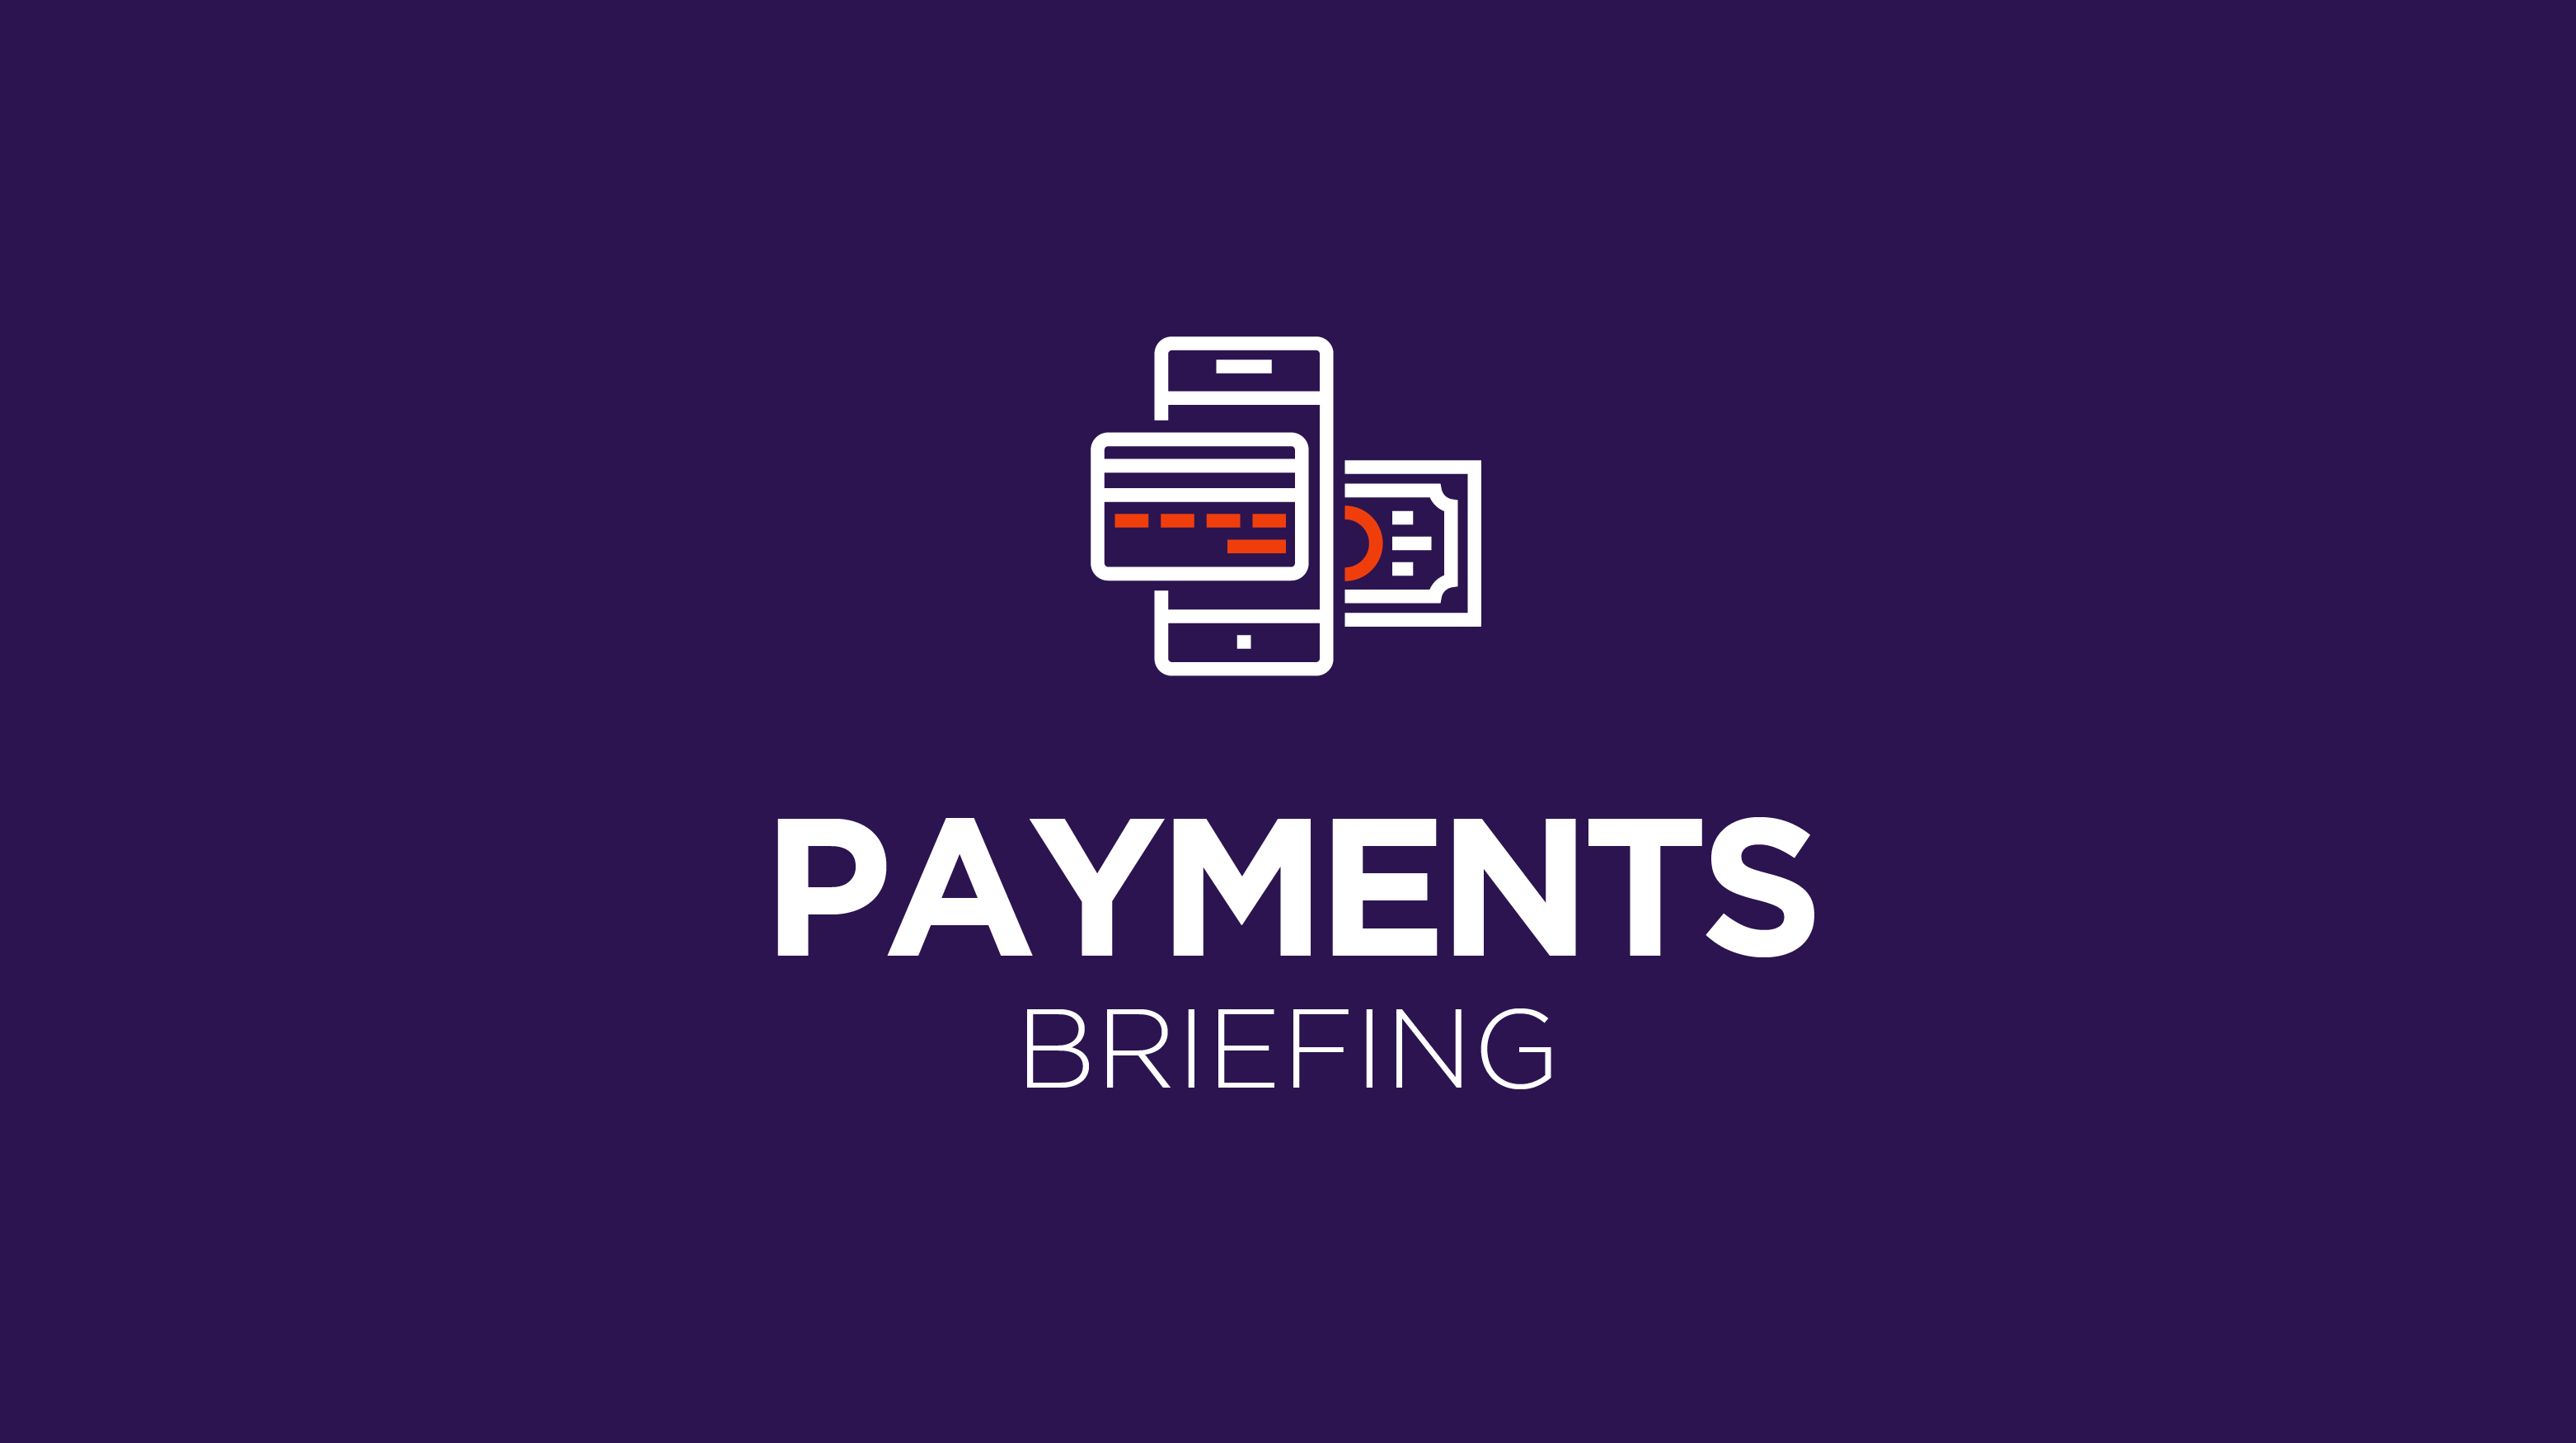 Payments Briefing: How digital wallets fared over the last year